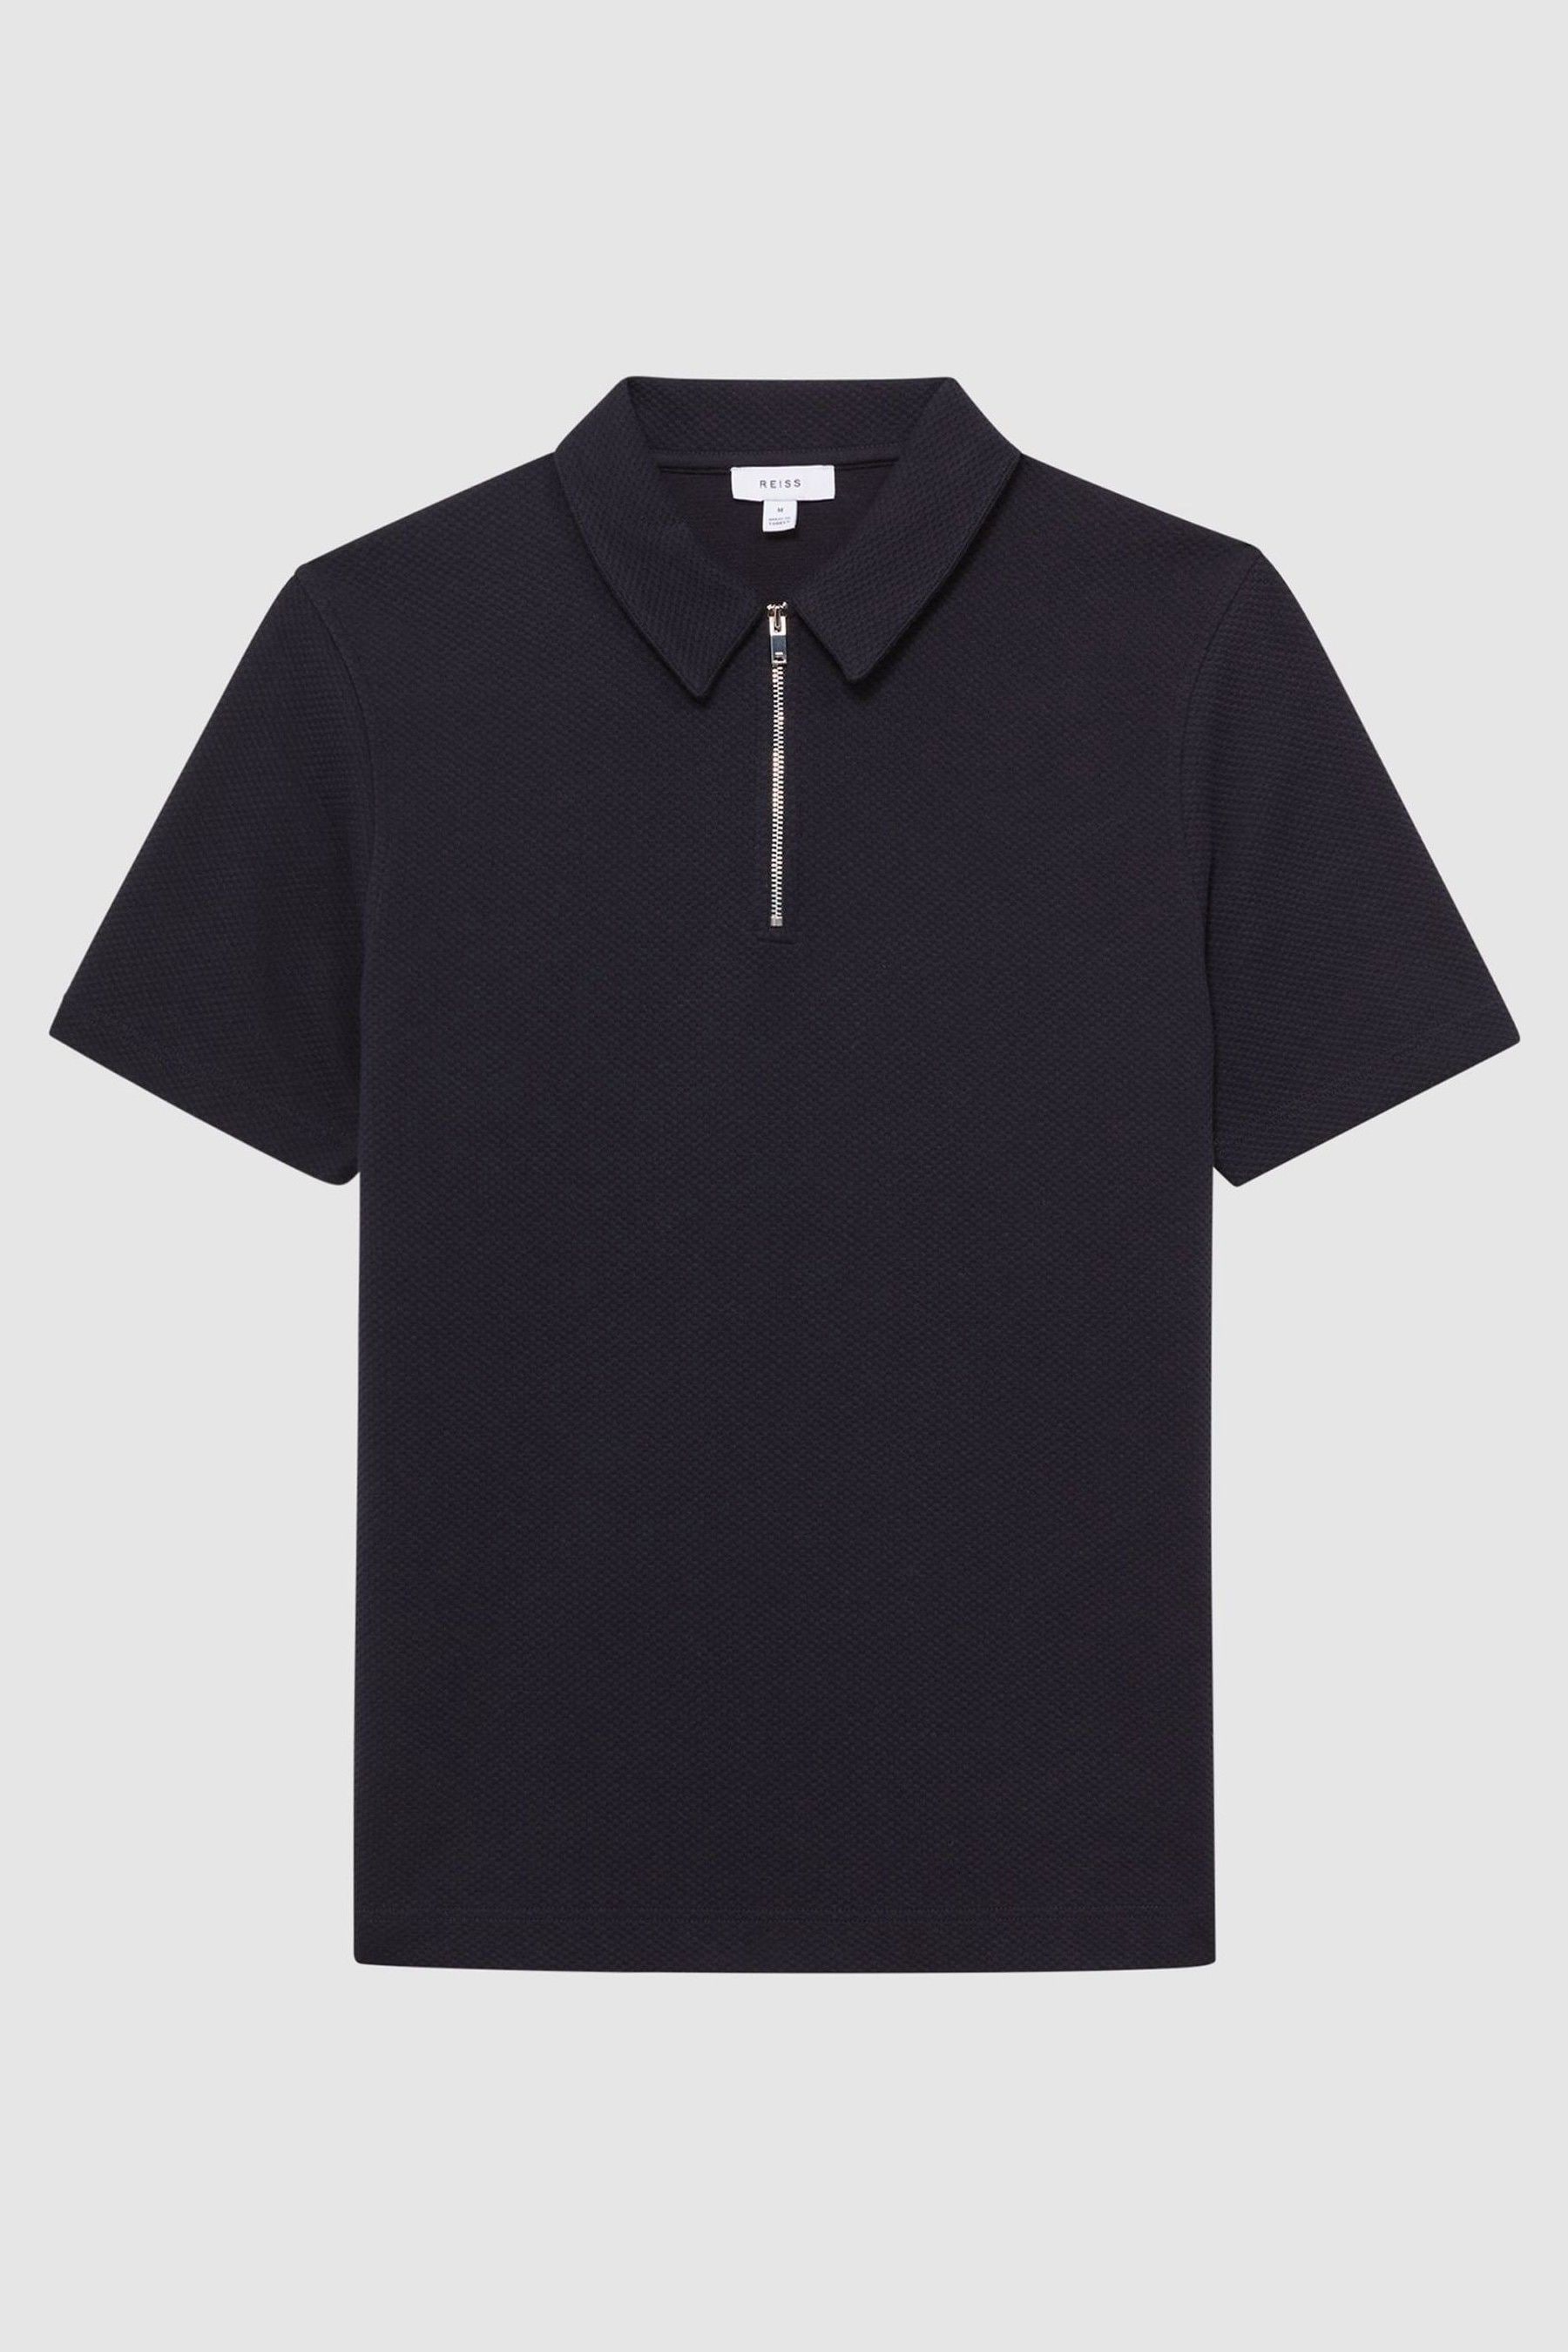 Buy Reiss Creed Slim Fit Textured Half Zip Polo Shirt from the Next UK ...